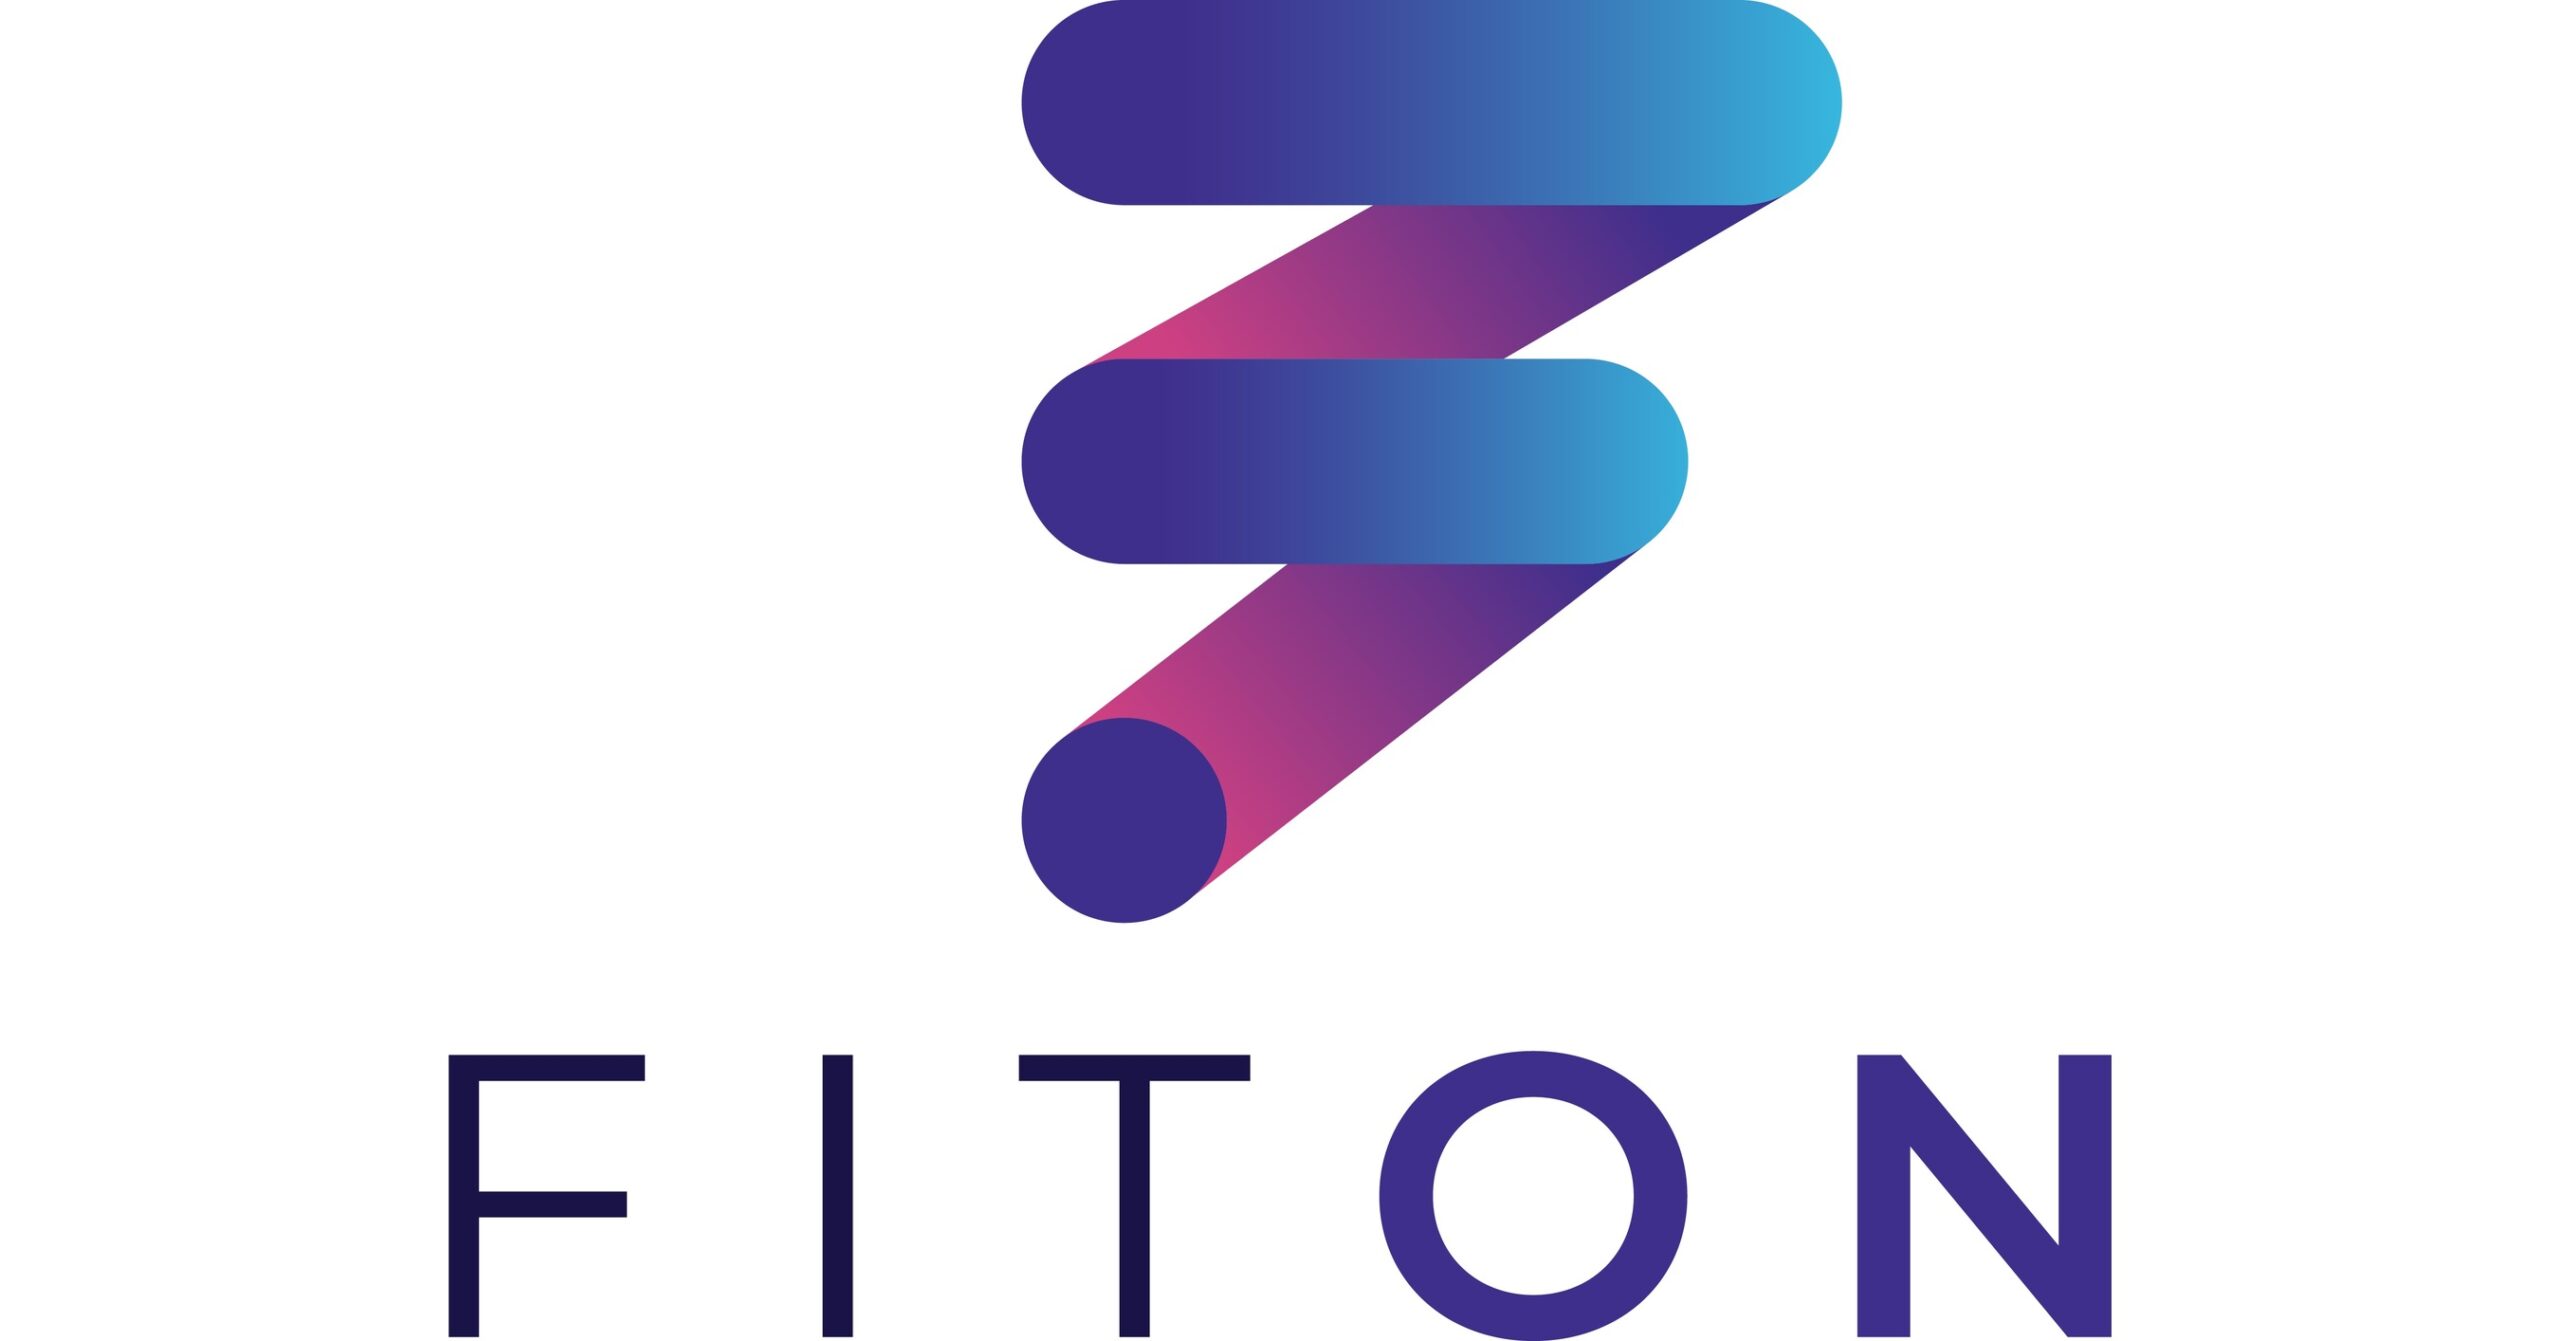 FitOn App Review: Is It Too Good To Be True?